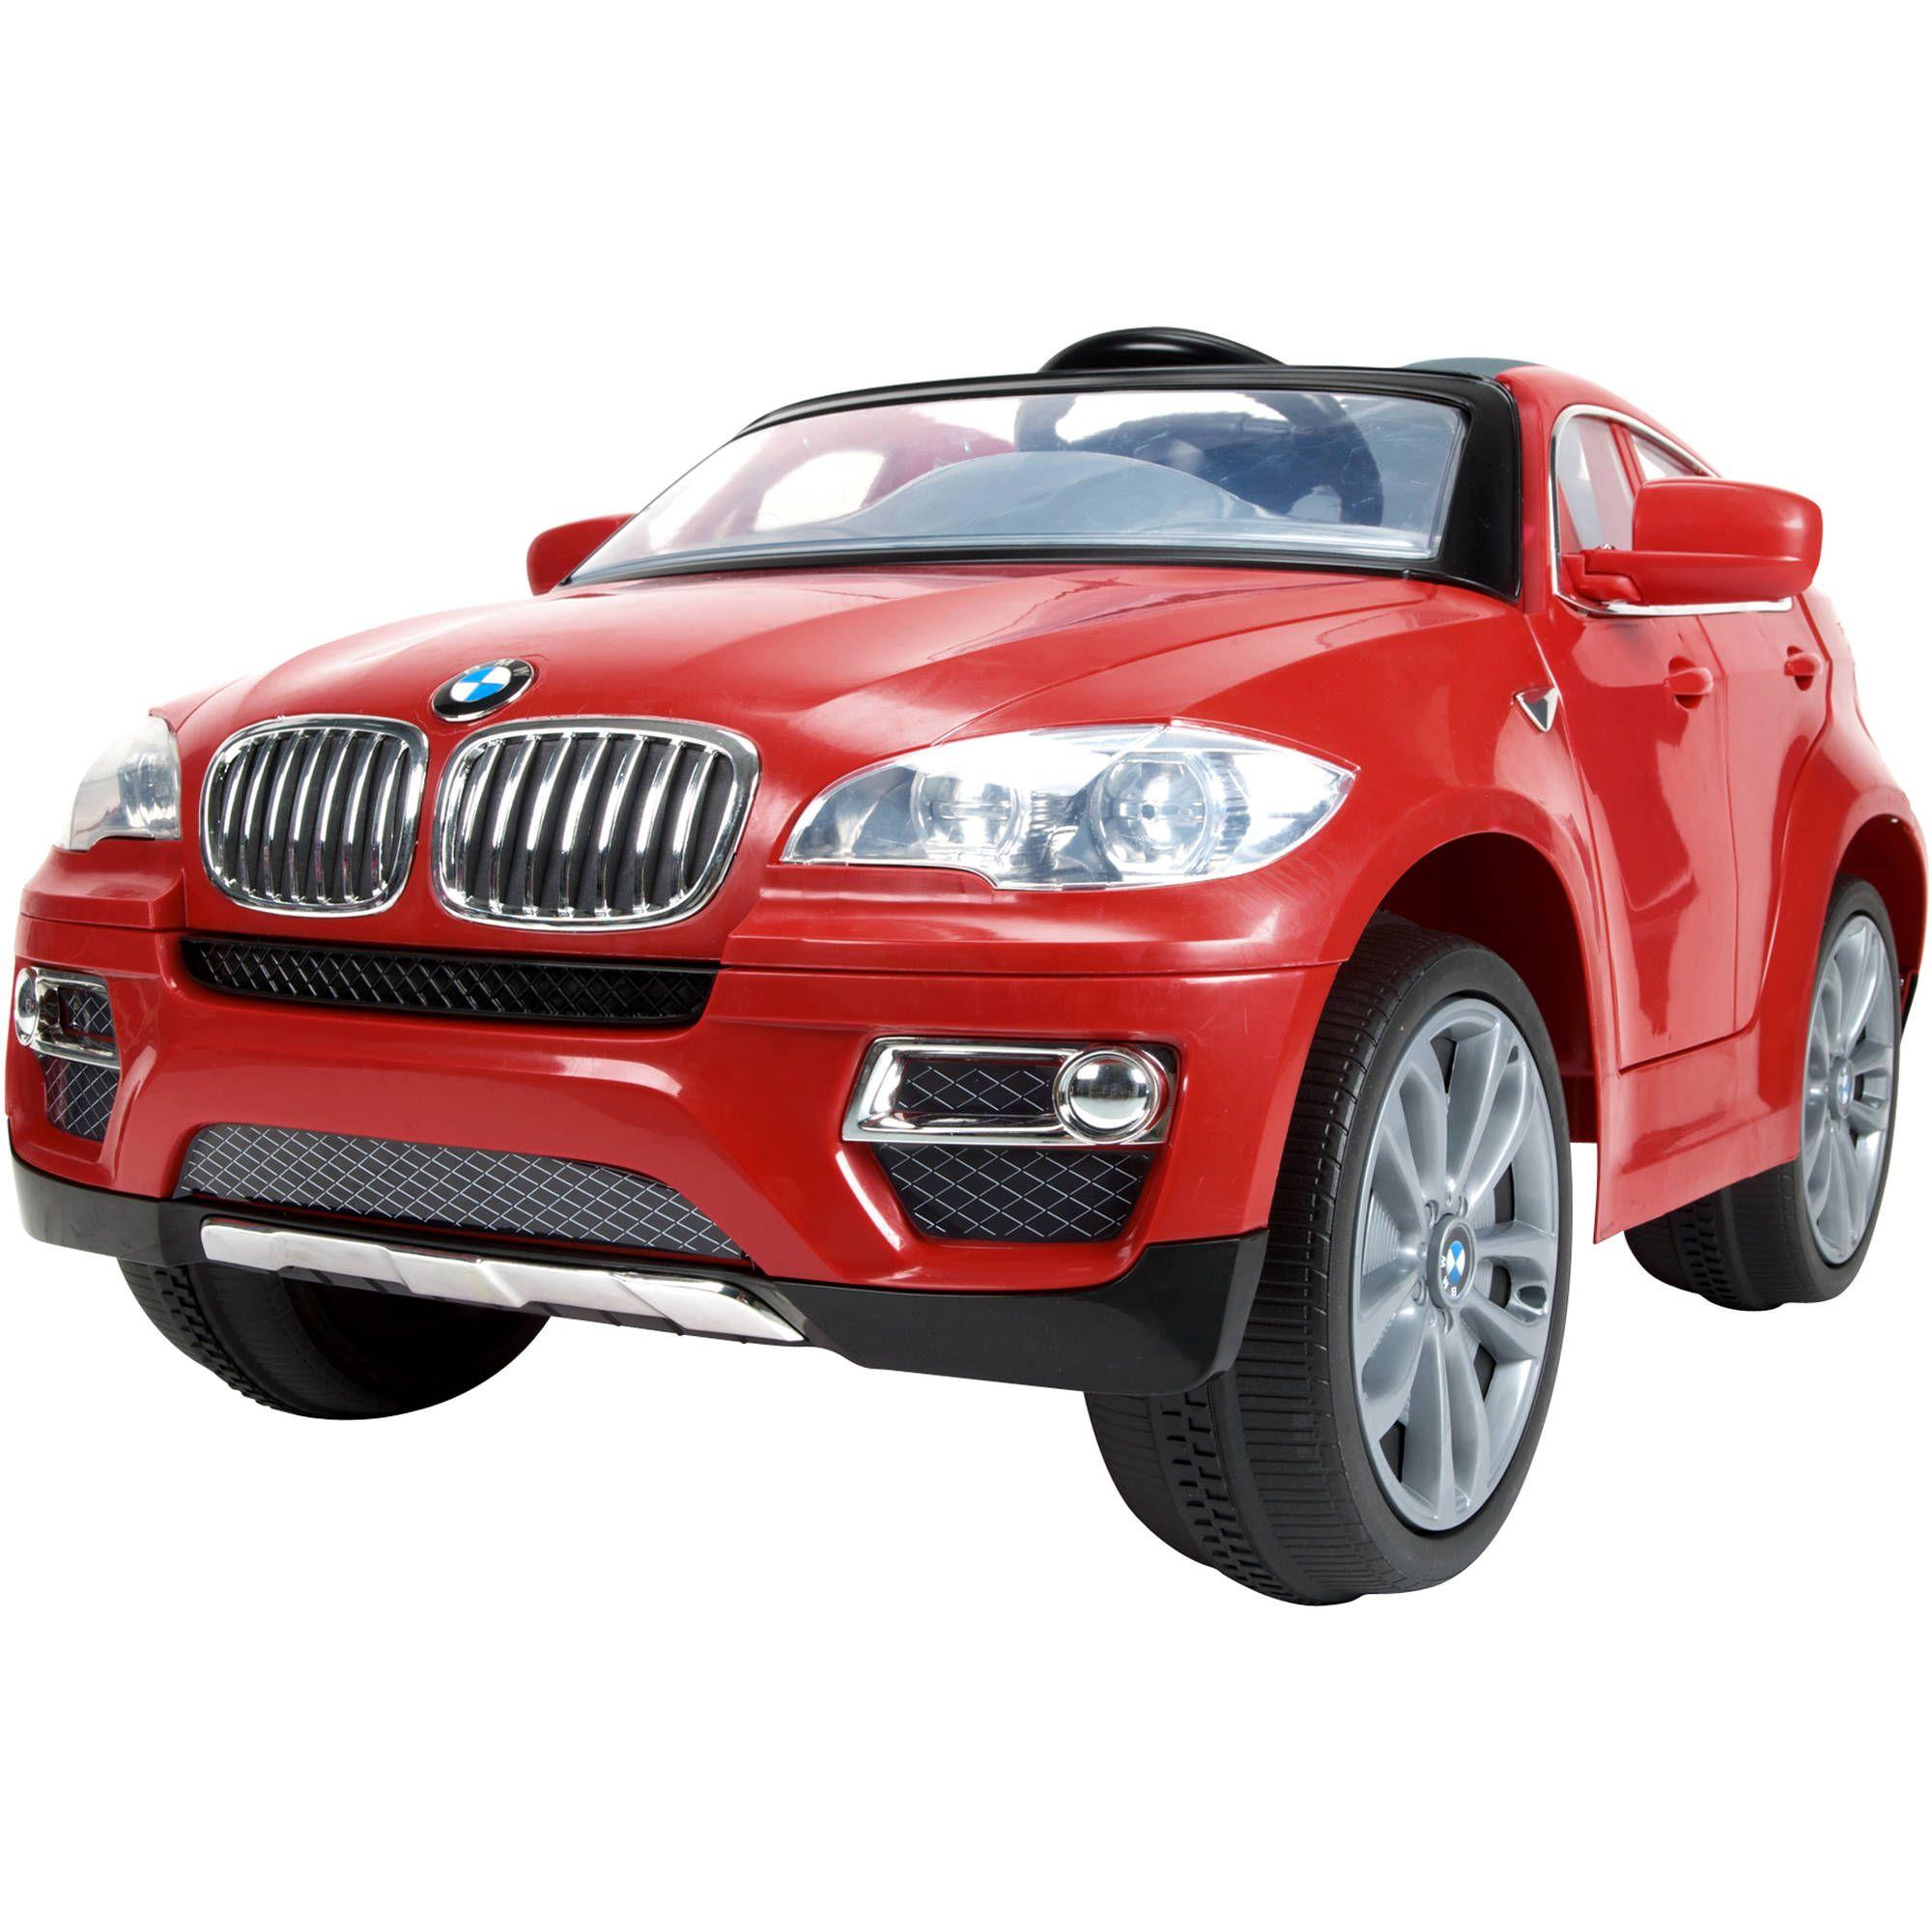 Red BMW Car Logo - BMW X6 6 Volt Battery Powered Ride On Toy Car By Huffy®